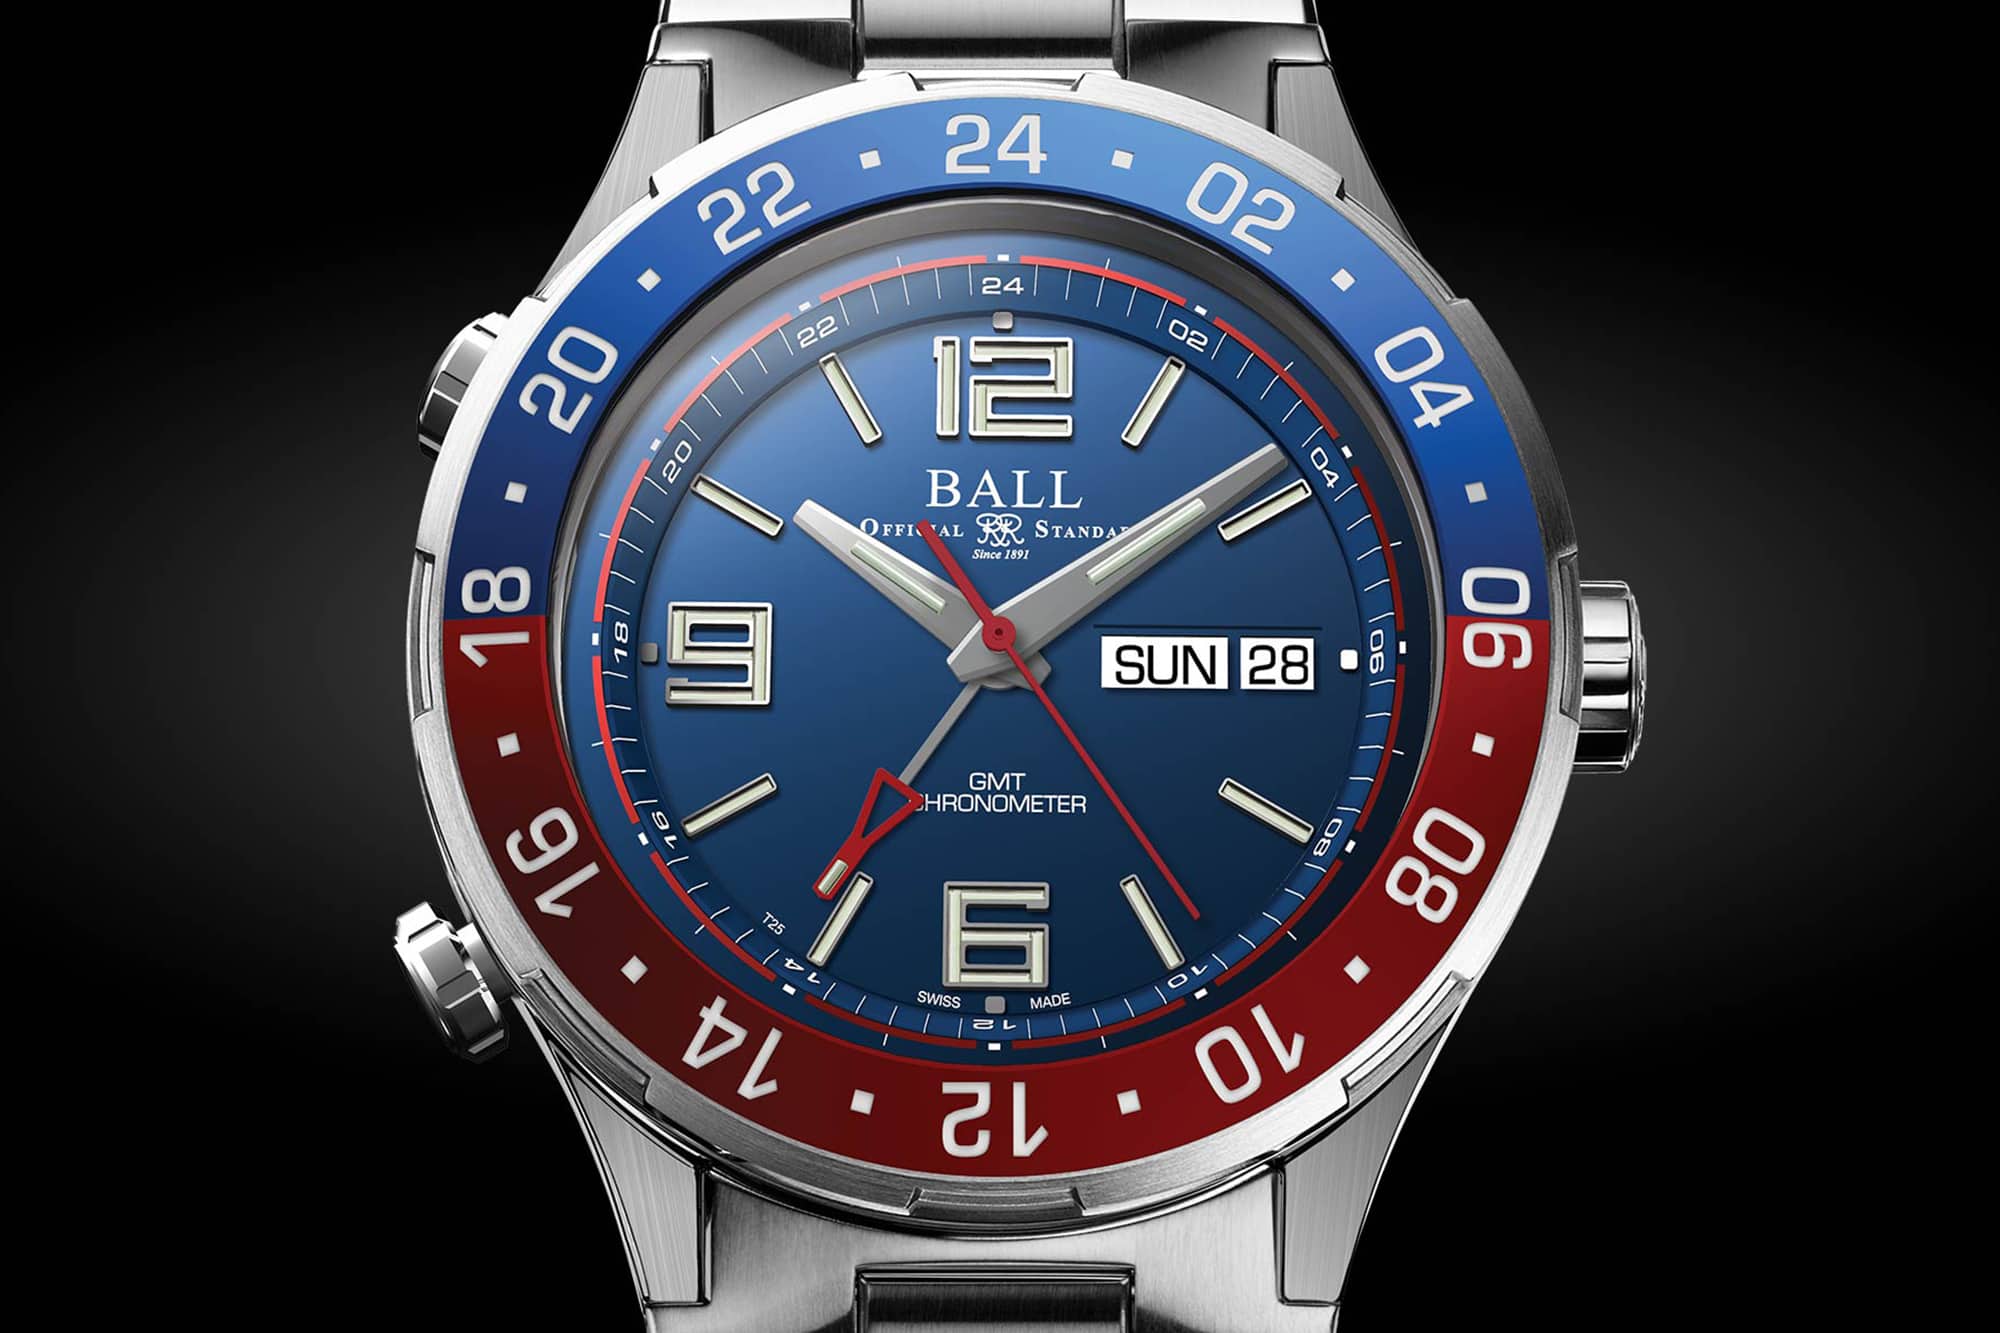 Introducing the BALL Roadmaster Marine GMT, Now Available for Pre-Order